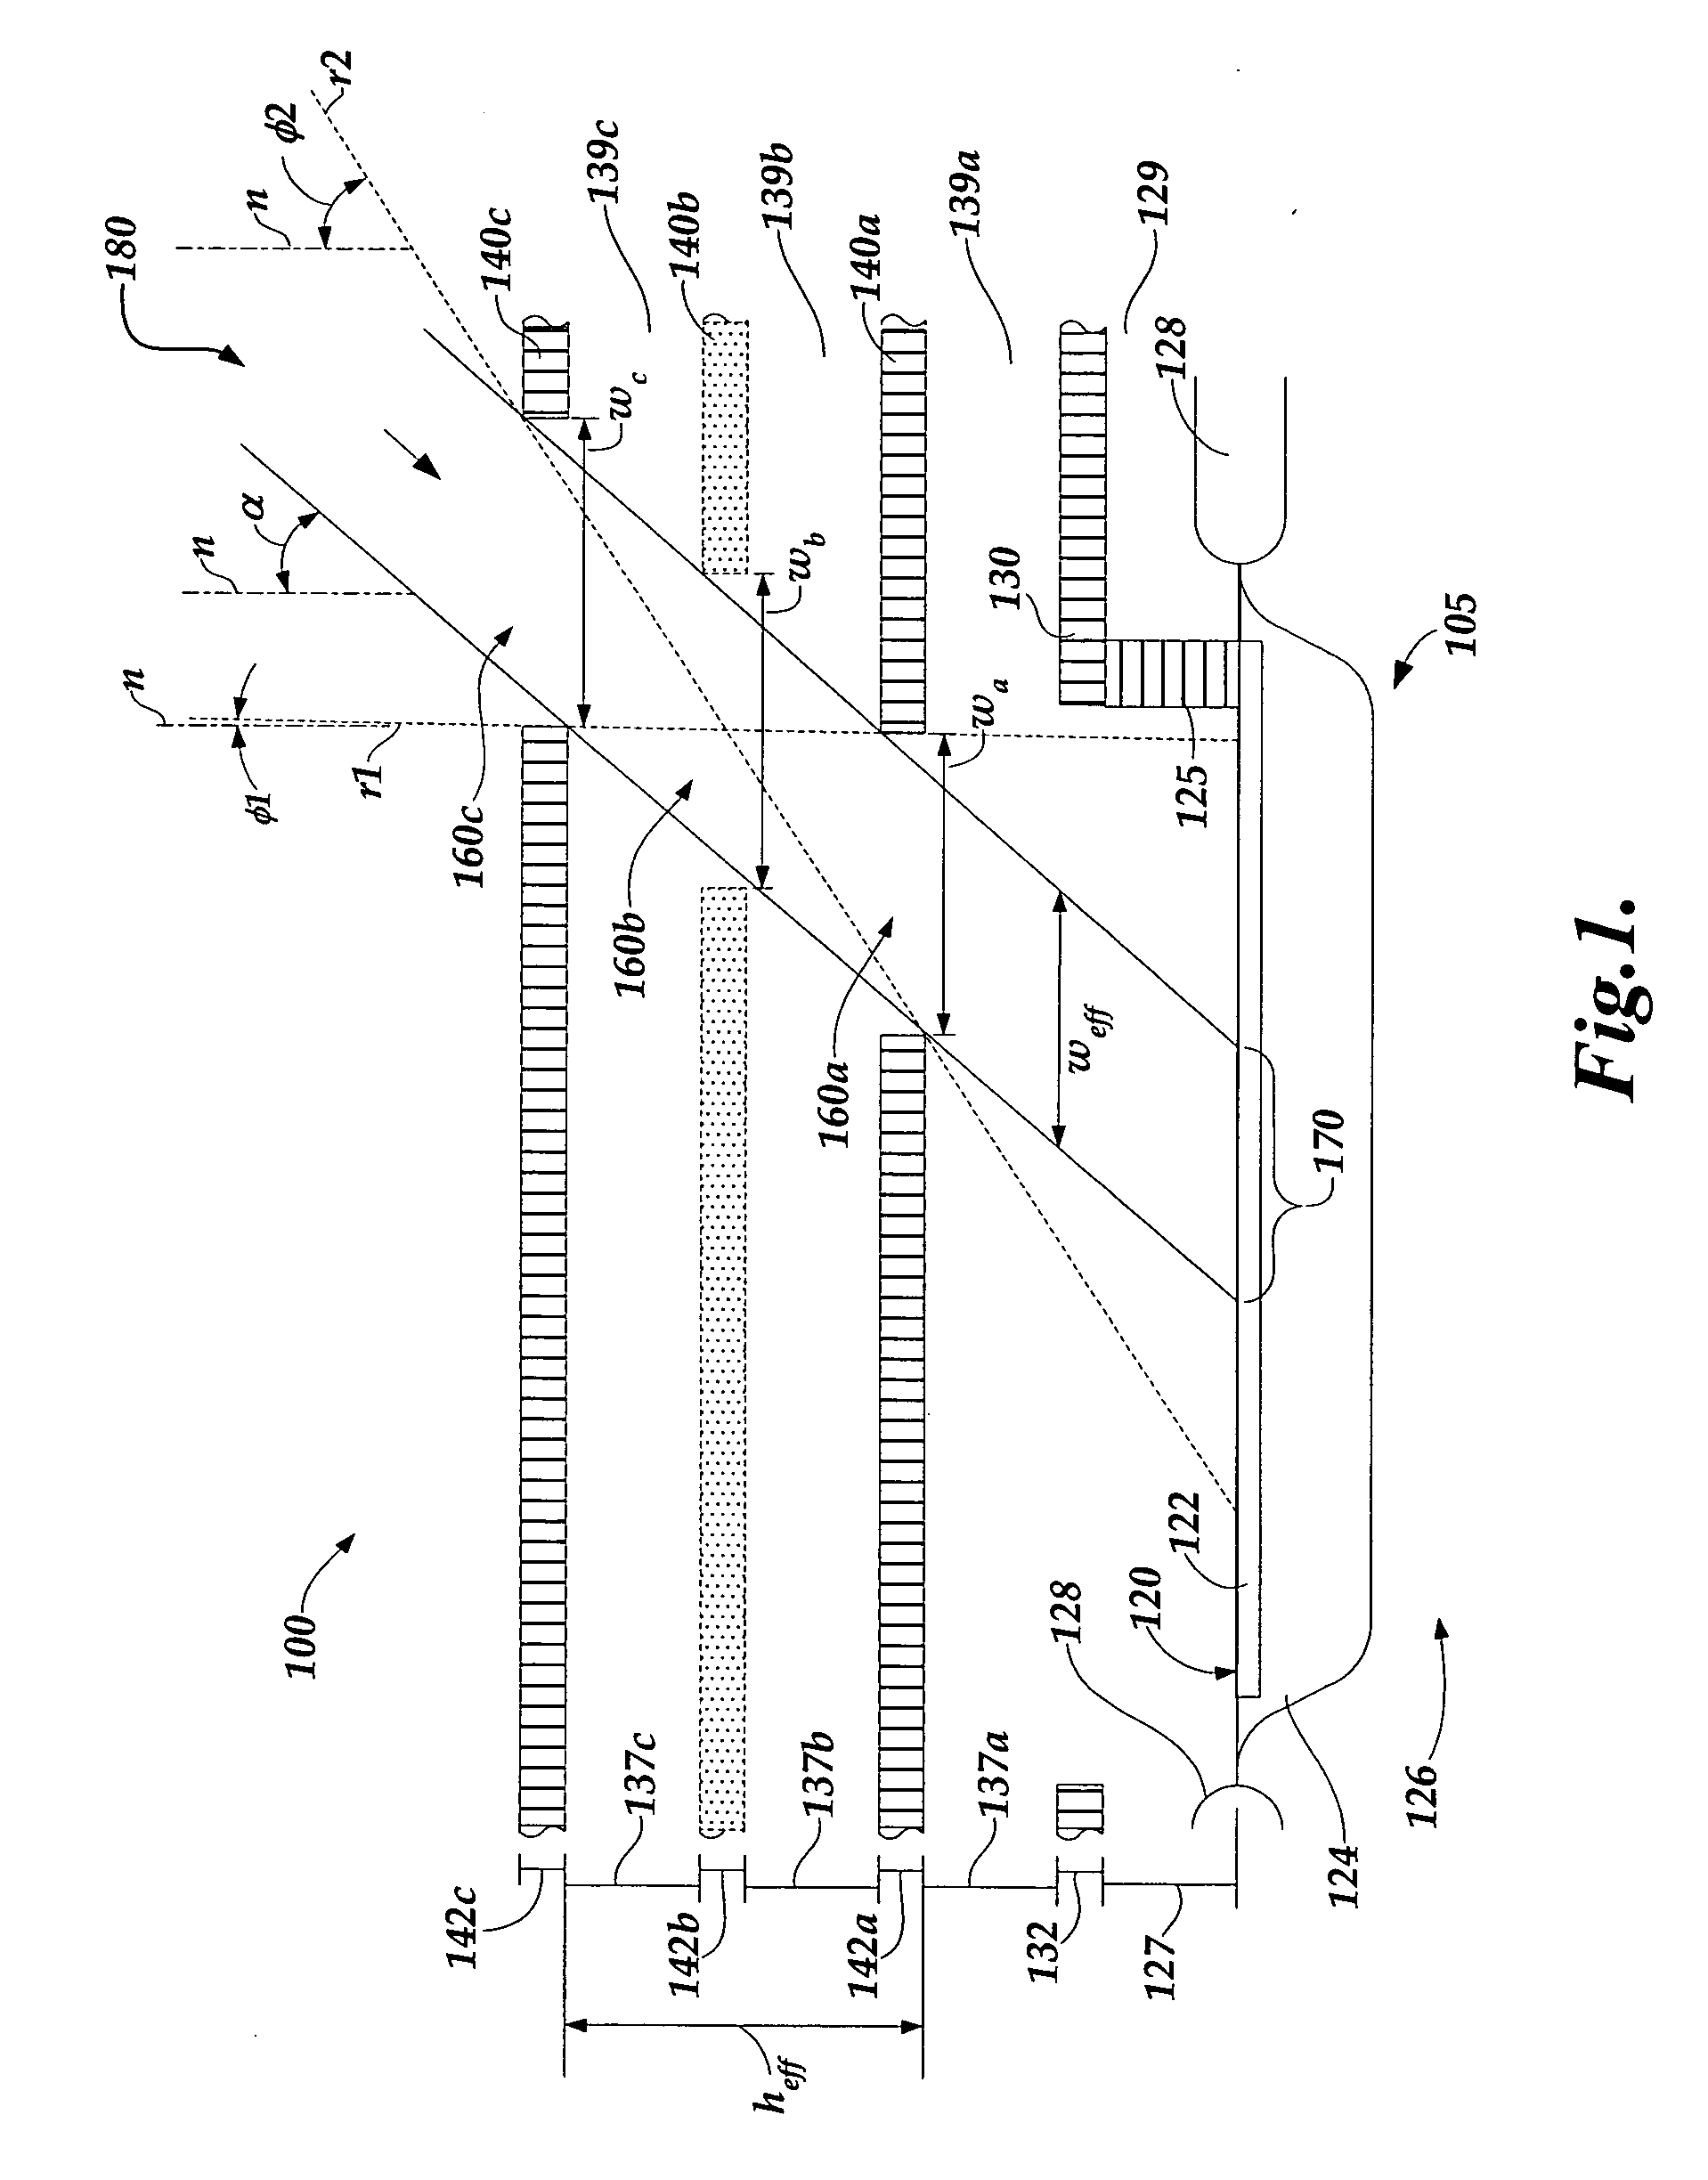 Incident light angle detector for light sensitive integrated circuit